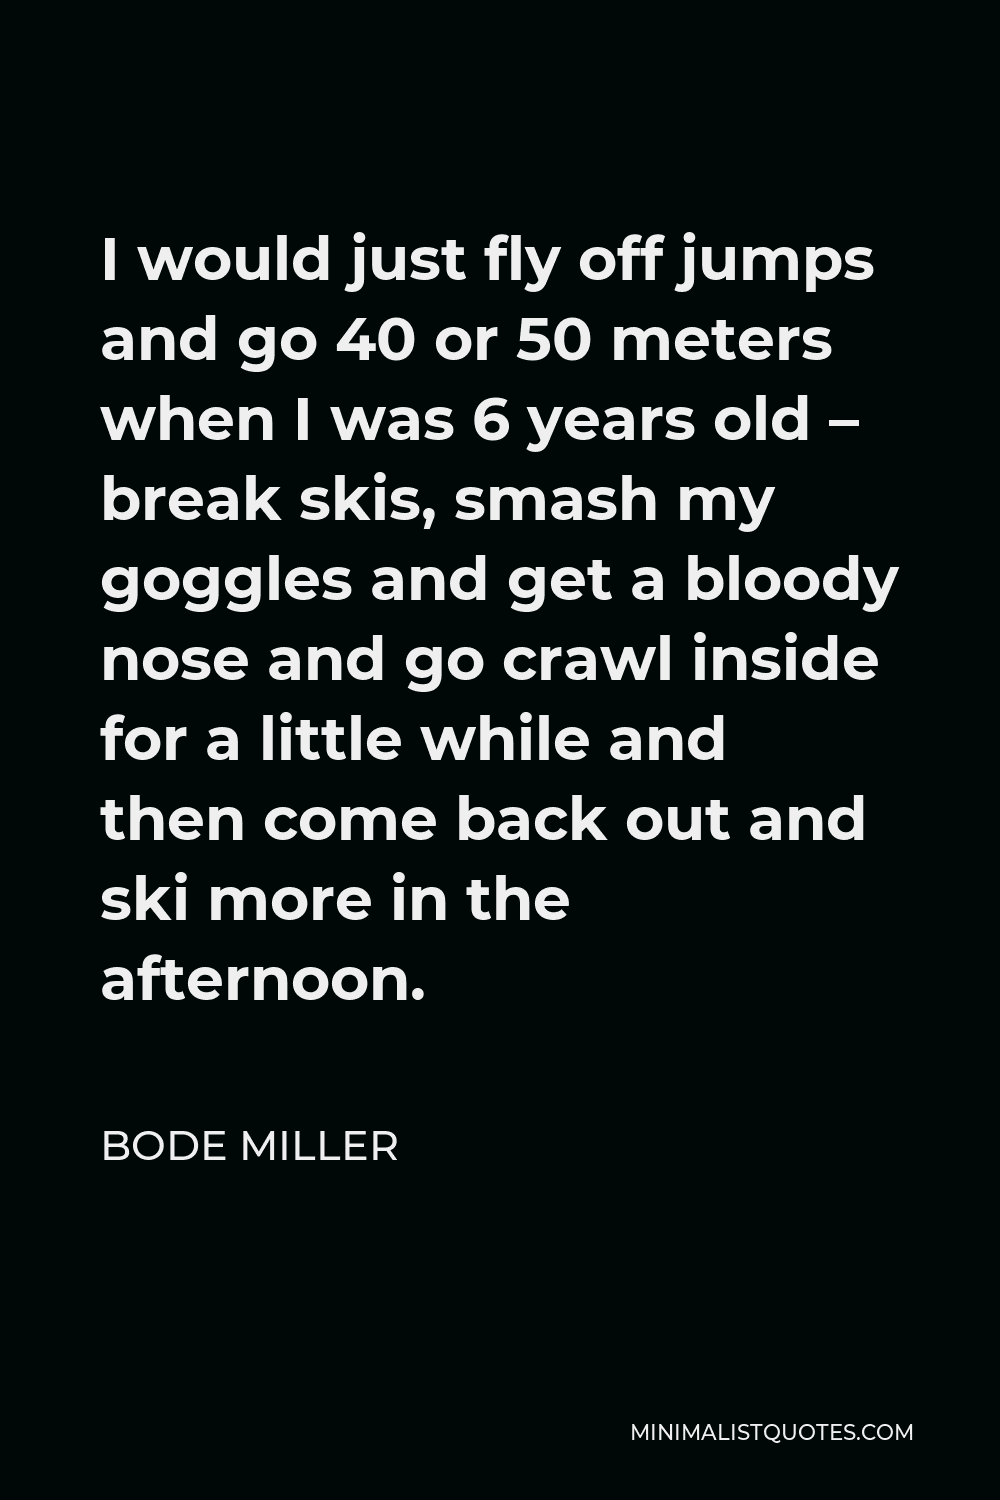 Bode Miller Quote - I would just fly off jumps and go 40 or 50 meters when I was 6 years old – break skis, smash my goggles and get a bloody nose and go crawl inside for a little while and then come back out and ski more in the afternoon.